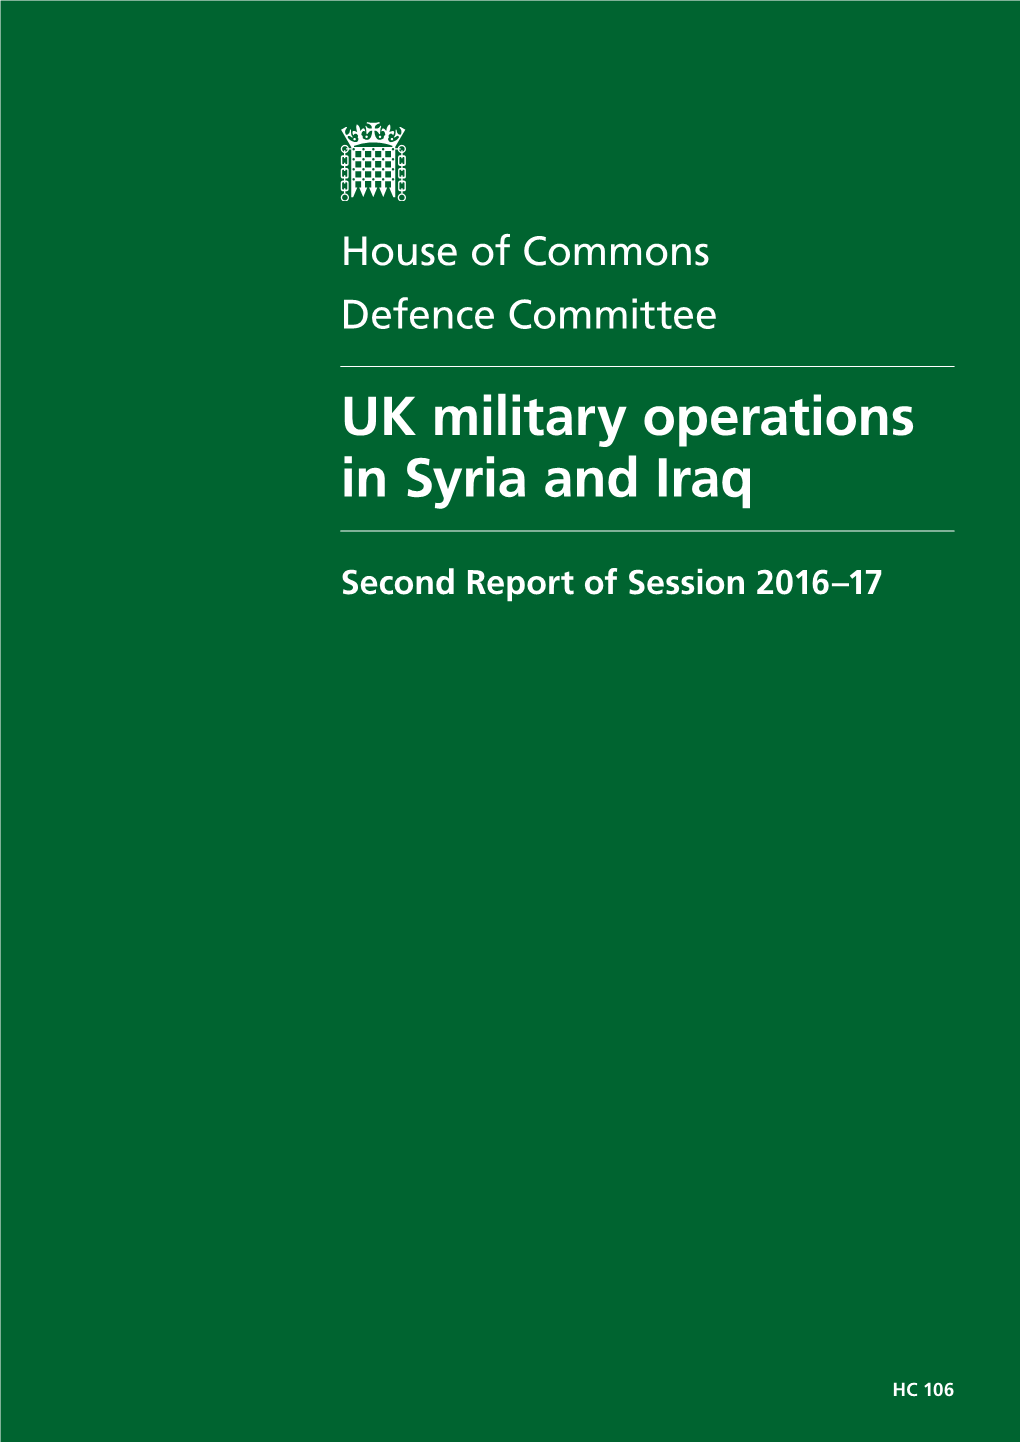 UK Military Operations in Syria and Iraq